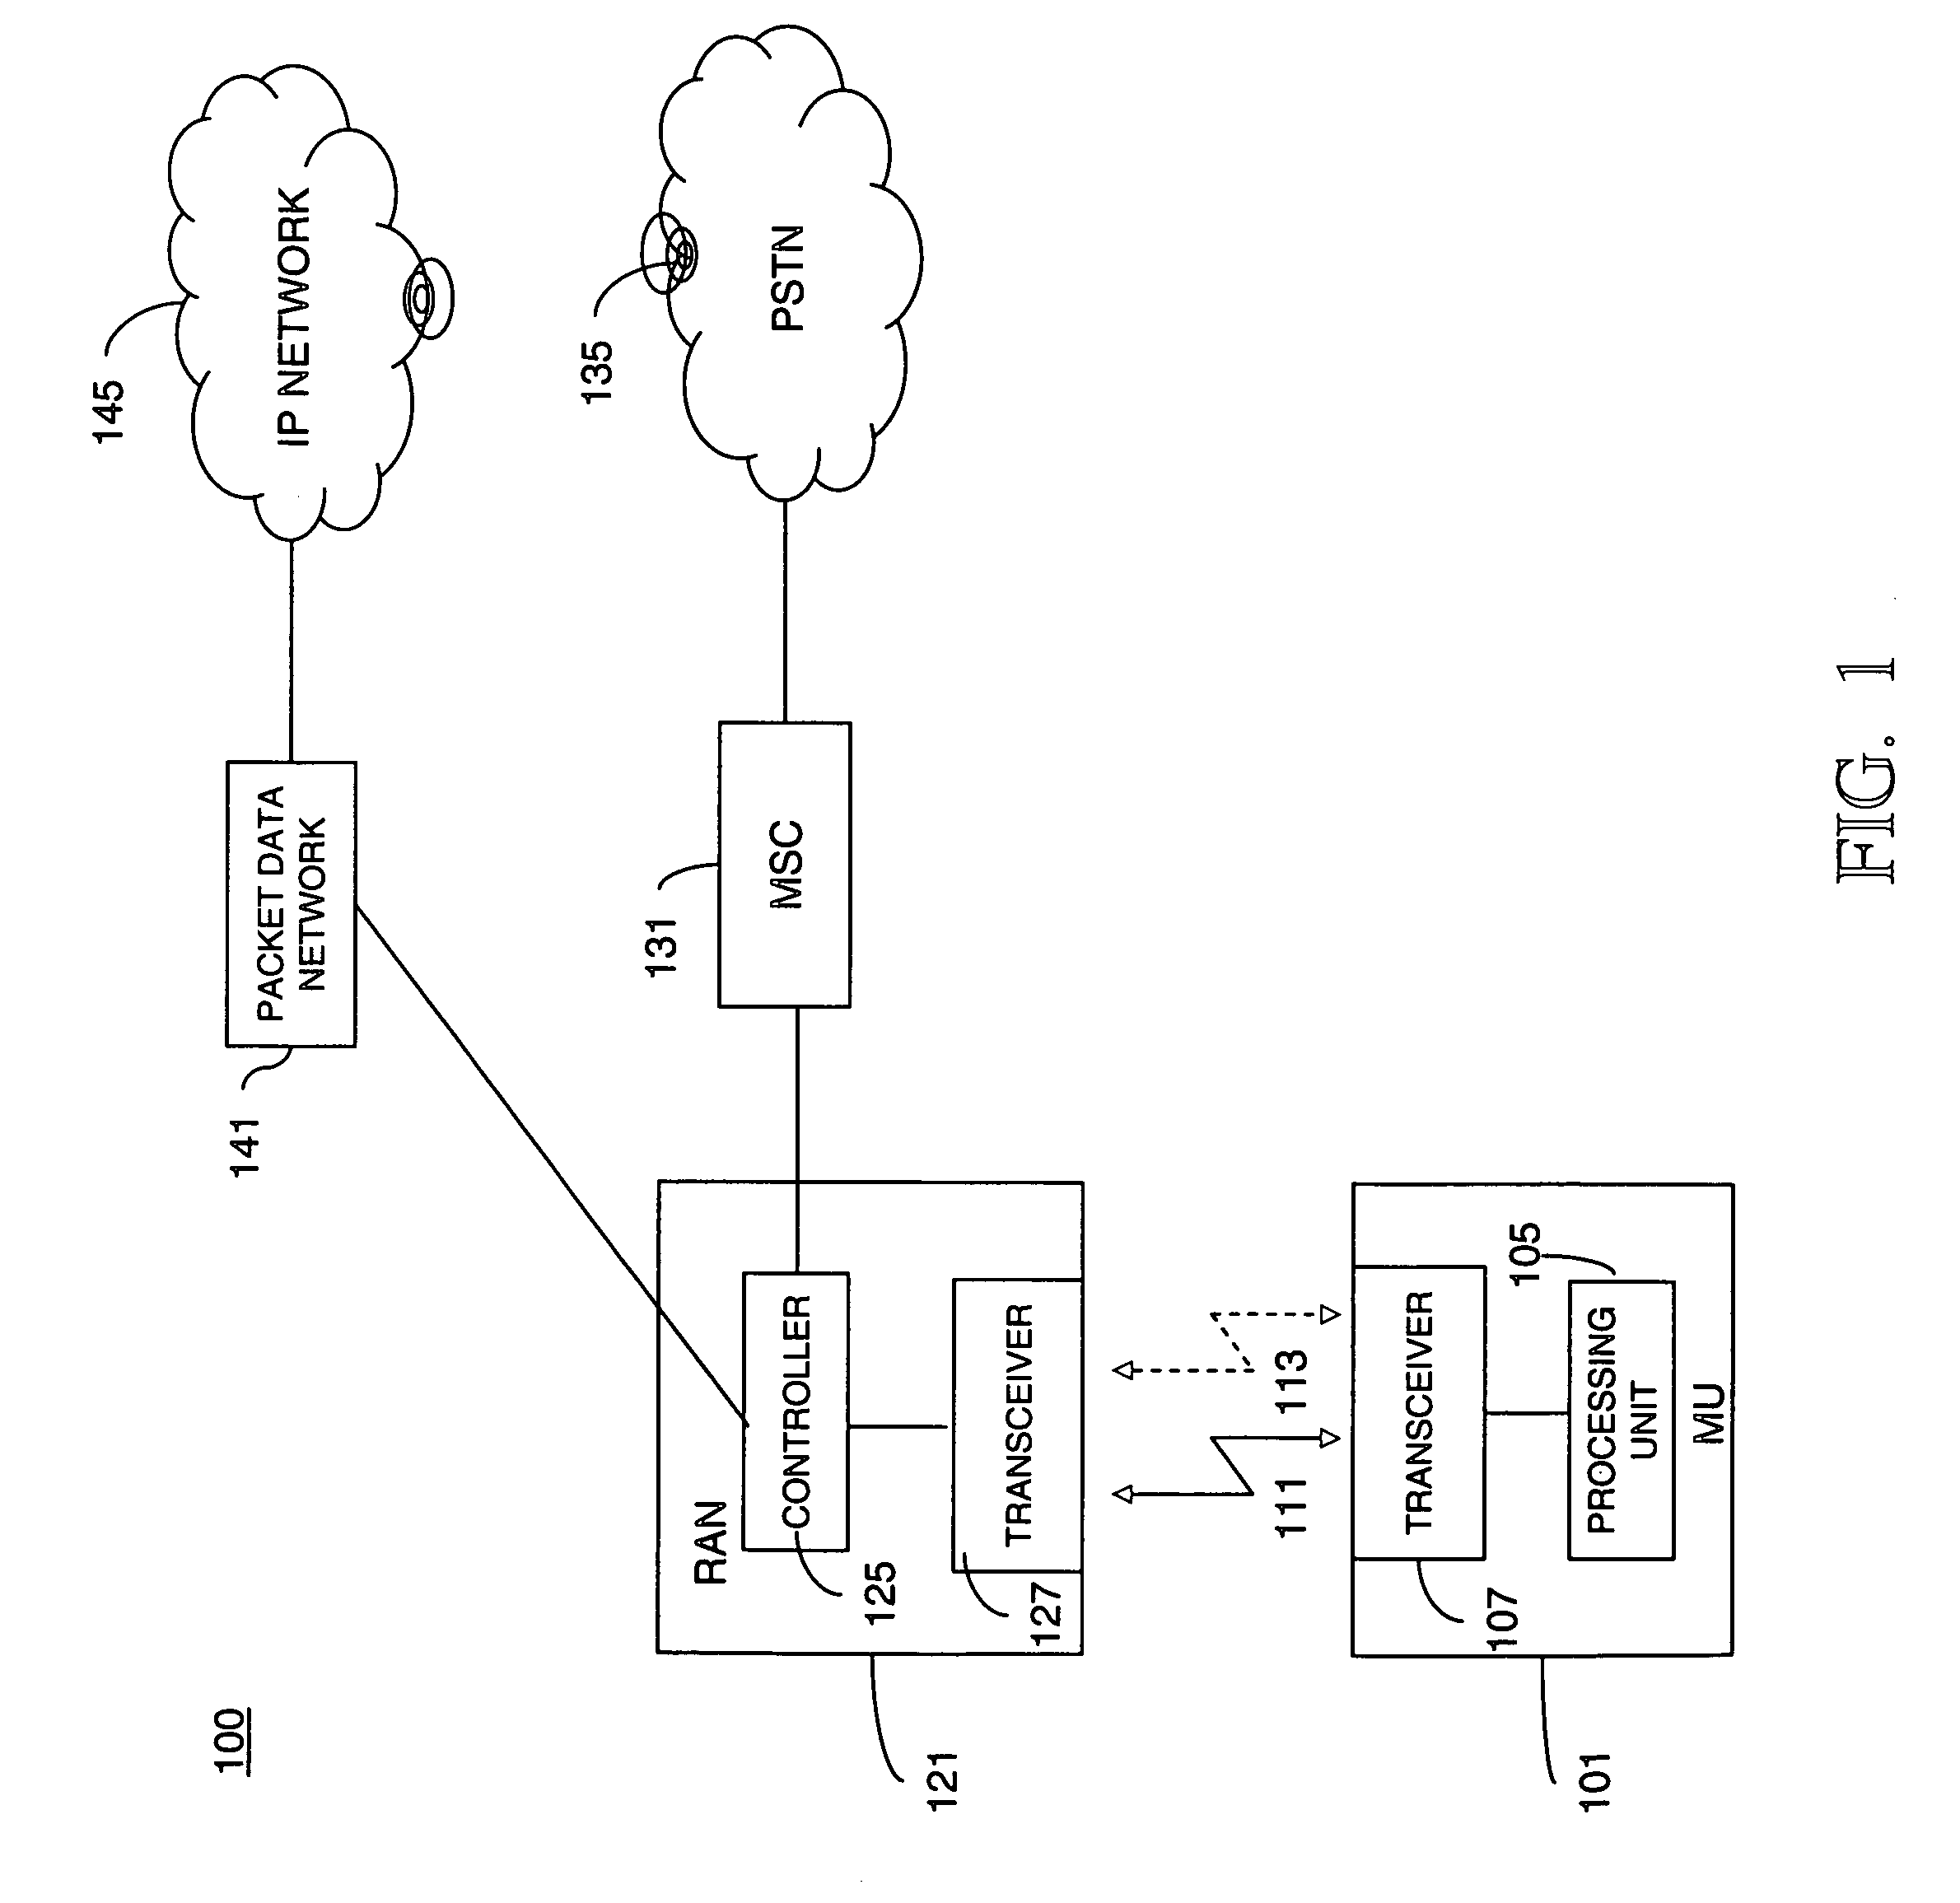 Method and apparatus for signaling ad-hoc group of mobile units